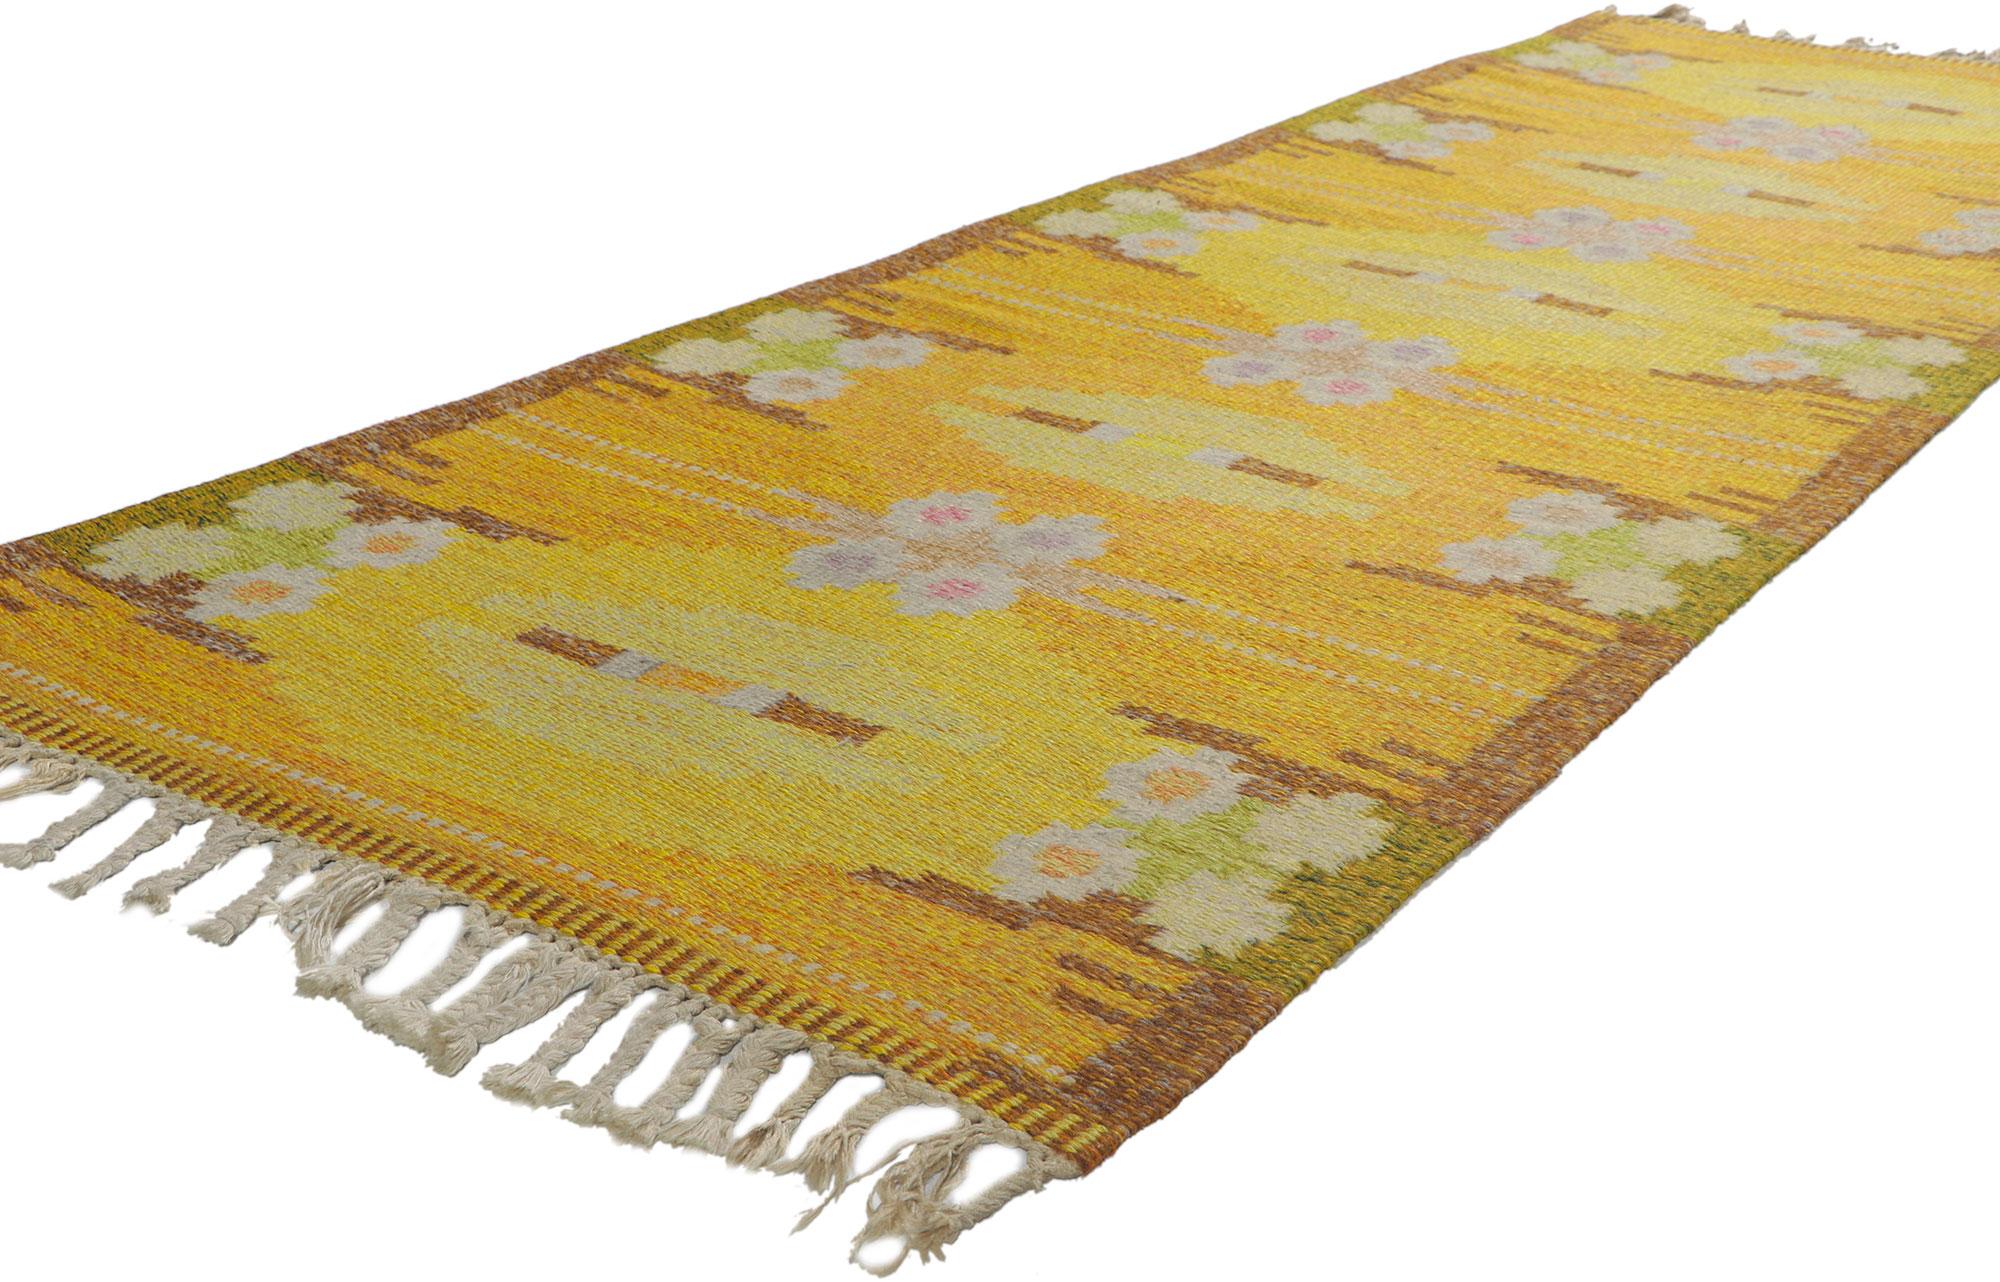 78507 Vintage Swedish Kilim Rollakan Rug by Ingegerd Silow, measures 02'08 x 08'05.
With its Scandinavian Modern style, incredible detail and texture, this handwoven wool vintage Swedish rollakan rug is a captivating vision of woven beauty. The